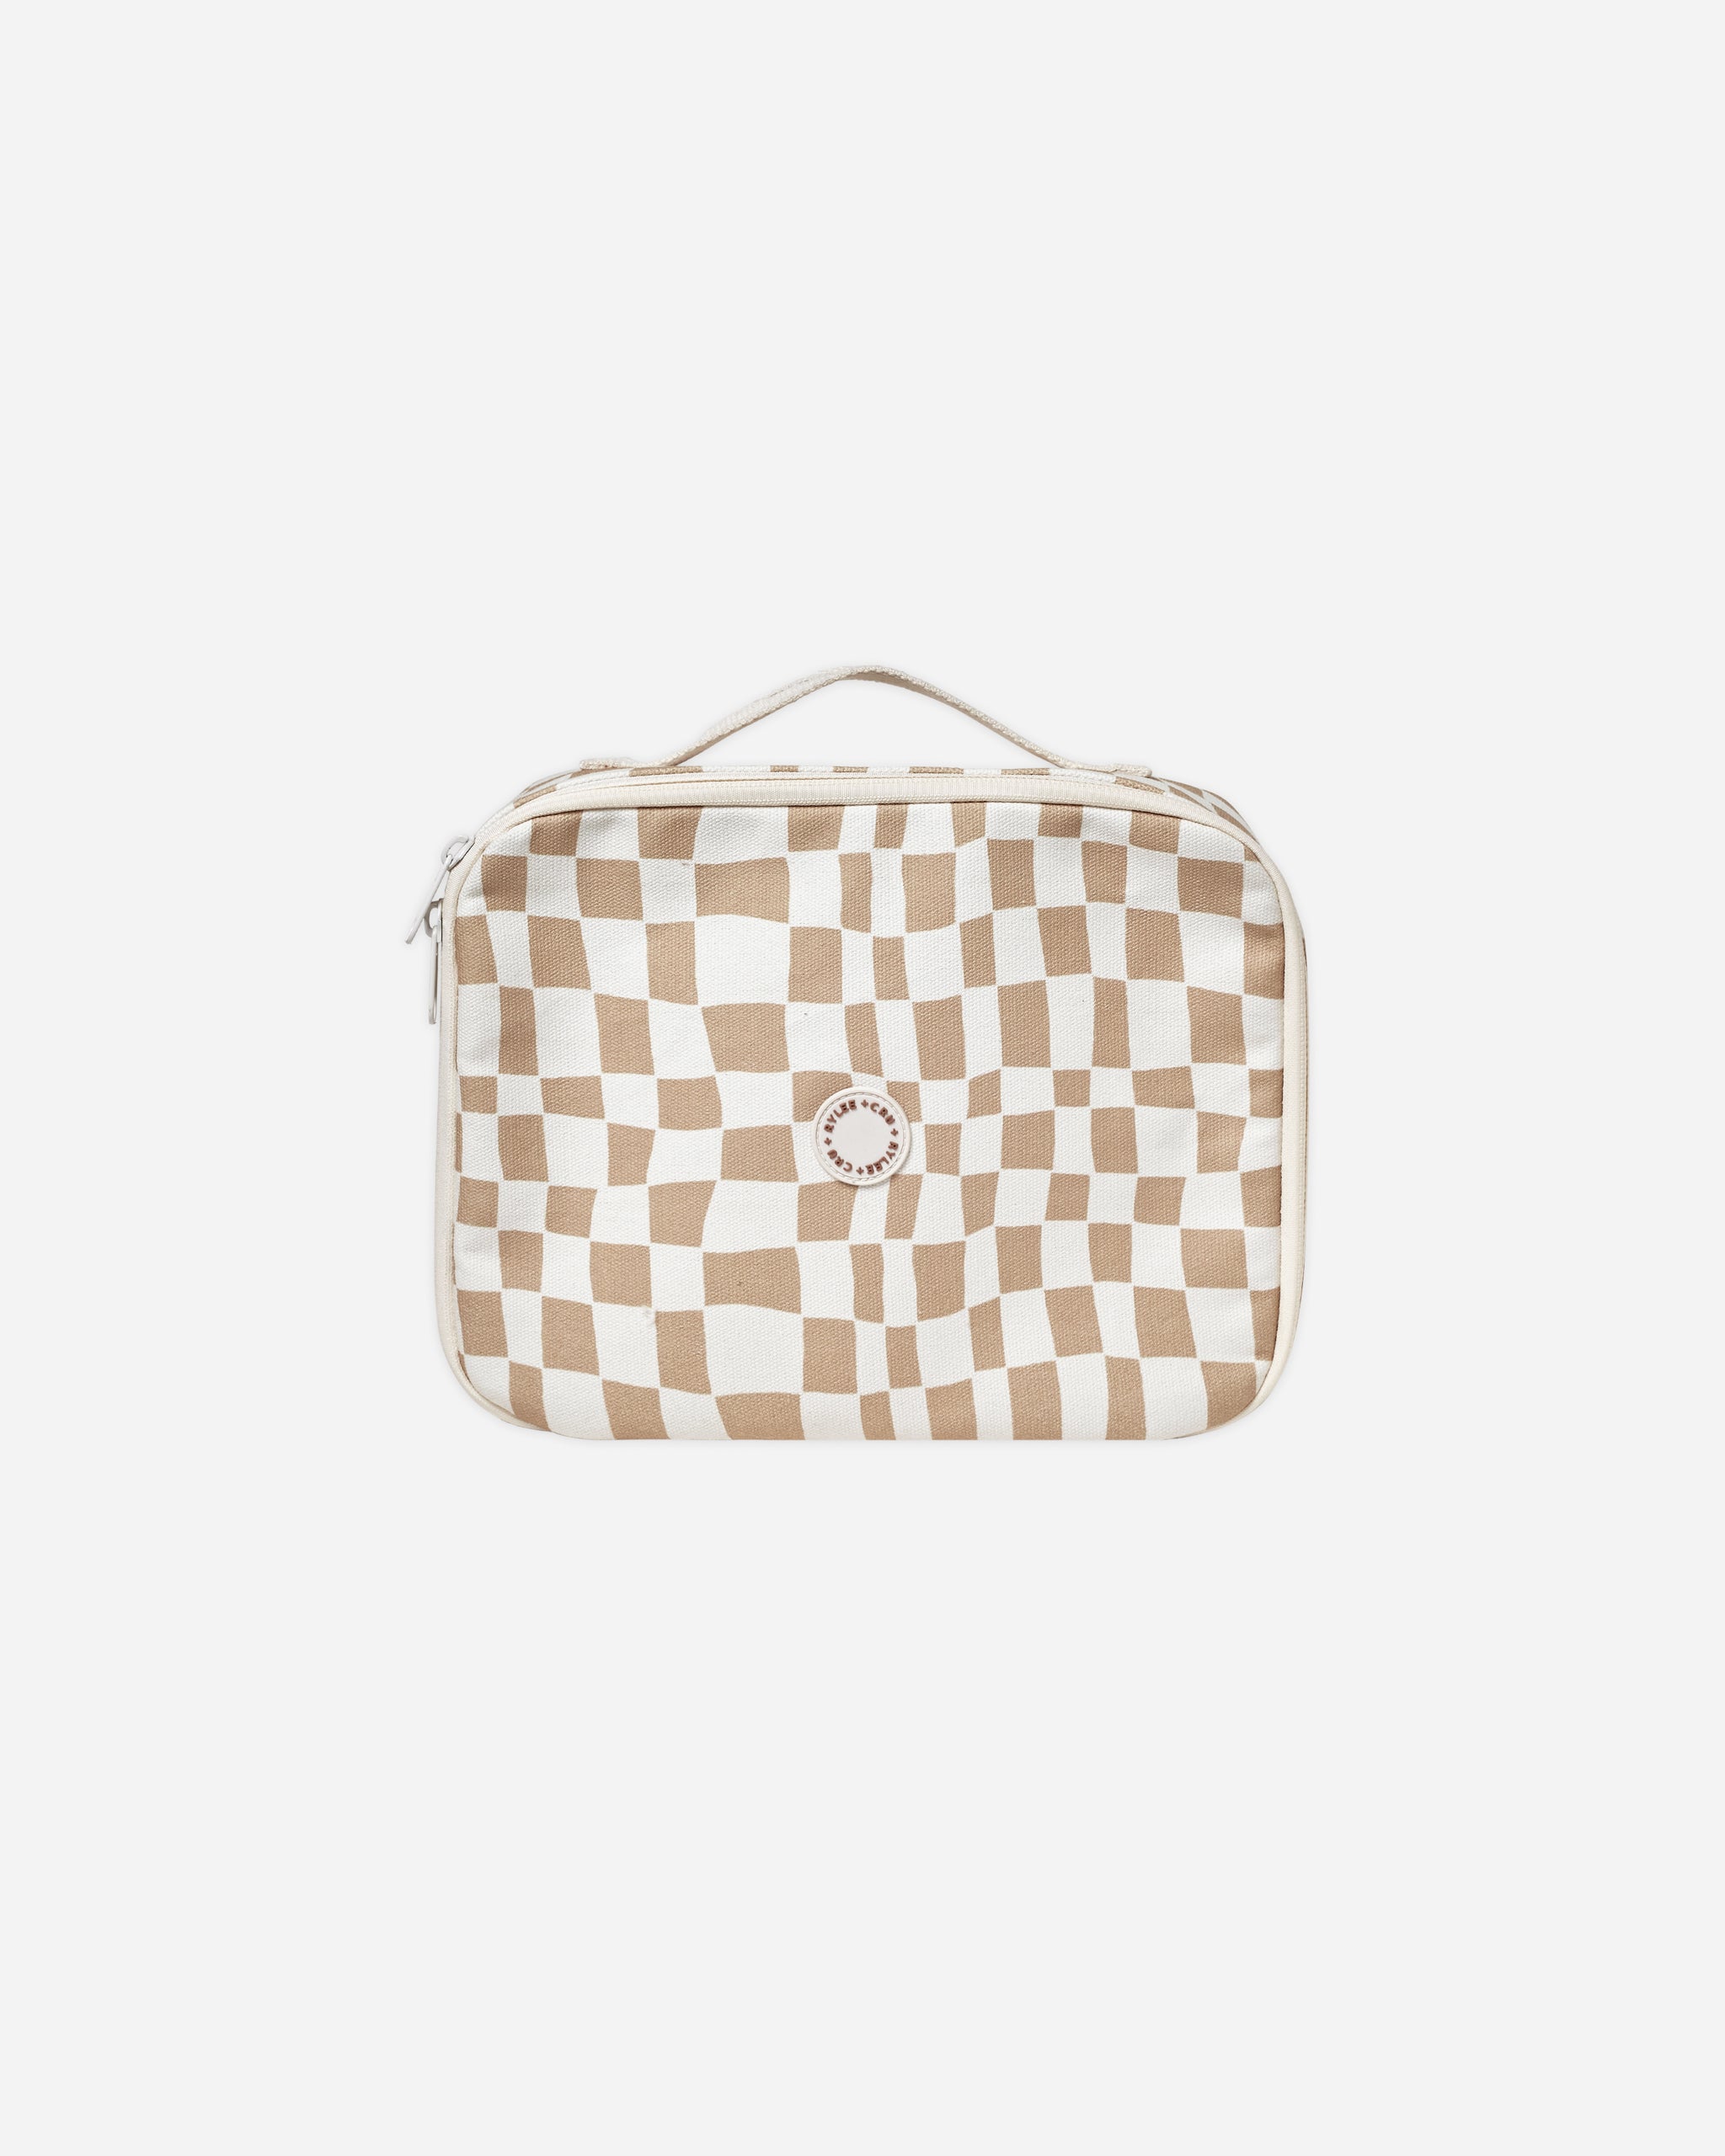 Lunch Bag || Sand Check - Rylee + Cru | Kids Clothes | Trendy Baby Clothes | Modern Infant Outfits |